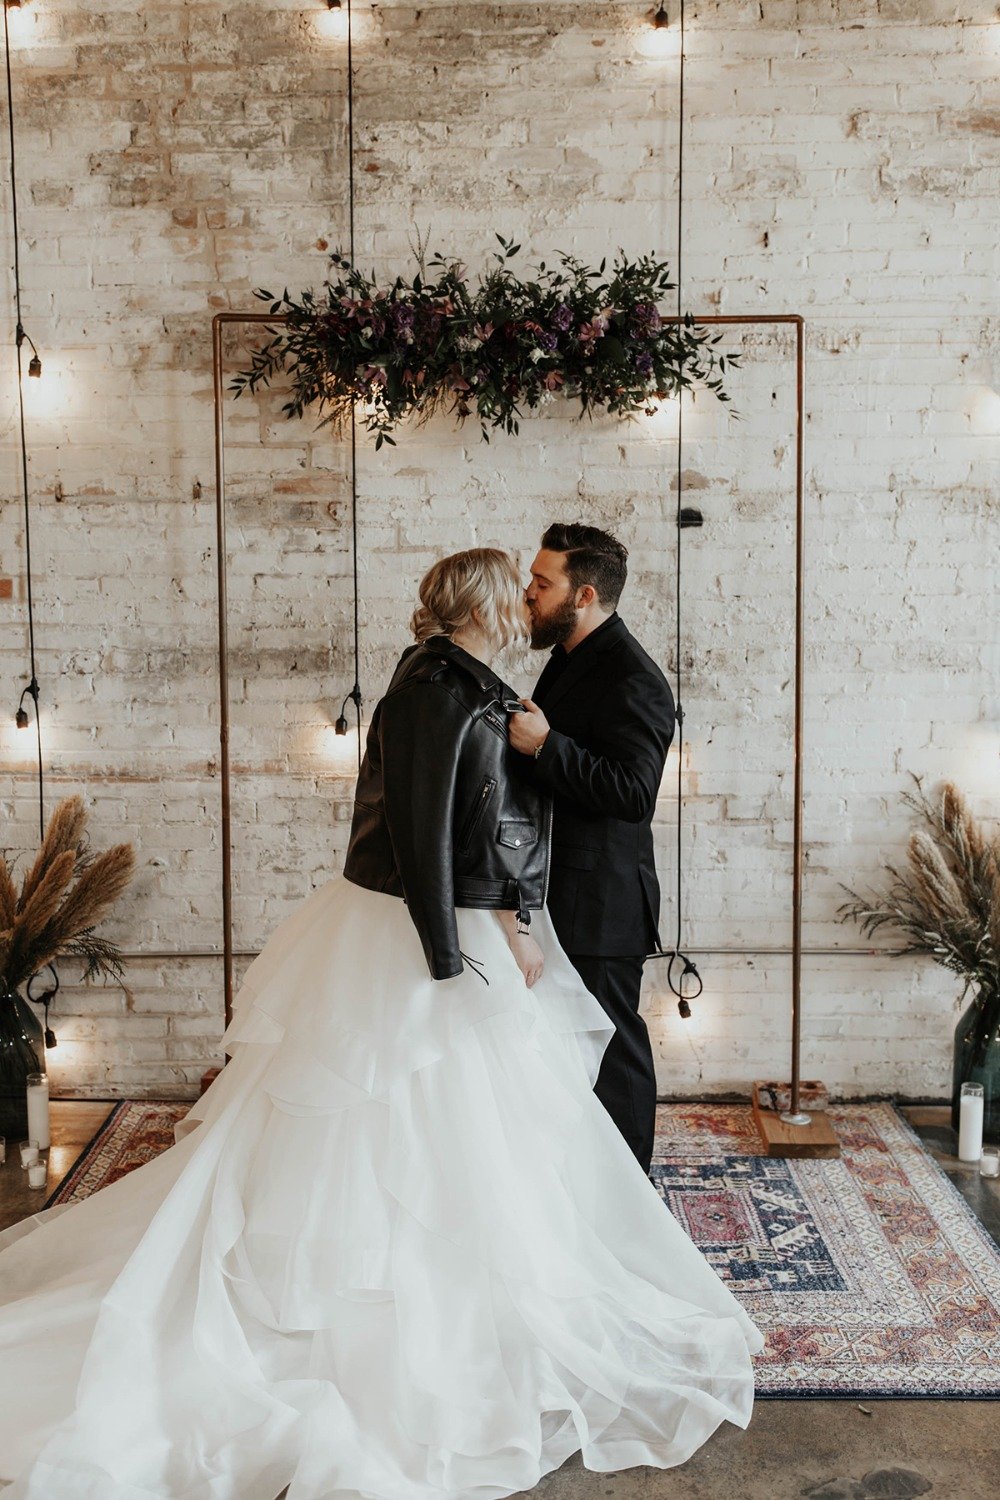 How To Have A Modern Rockstar Chic Wedding